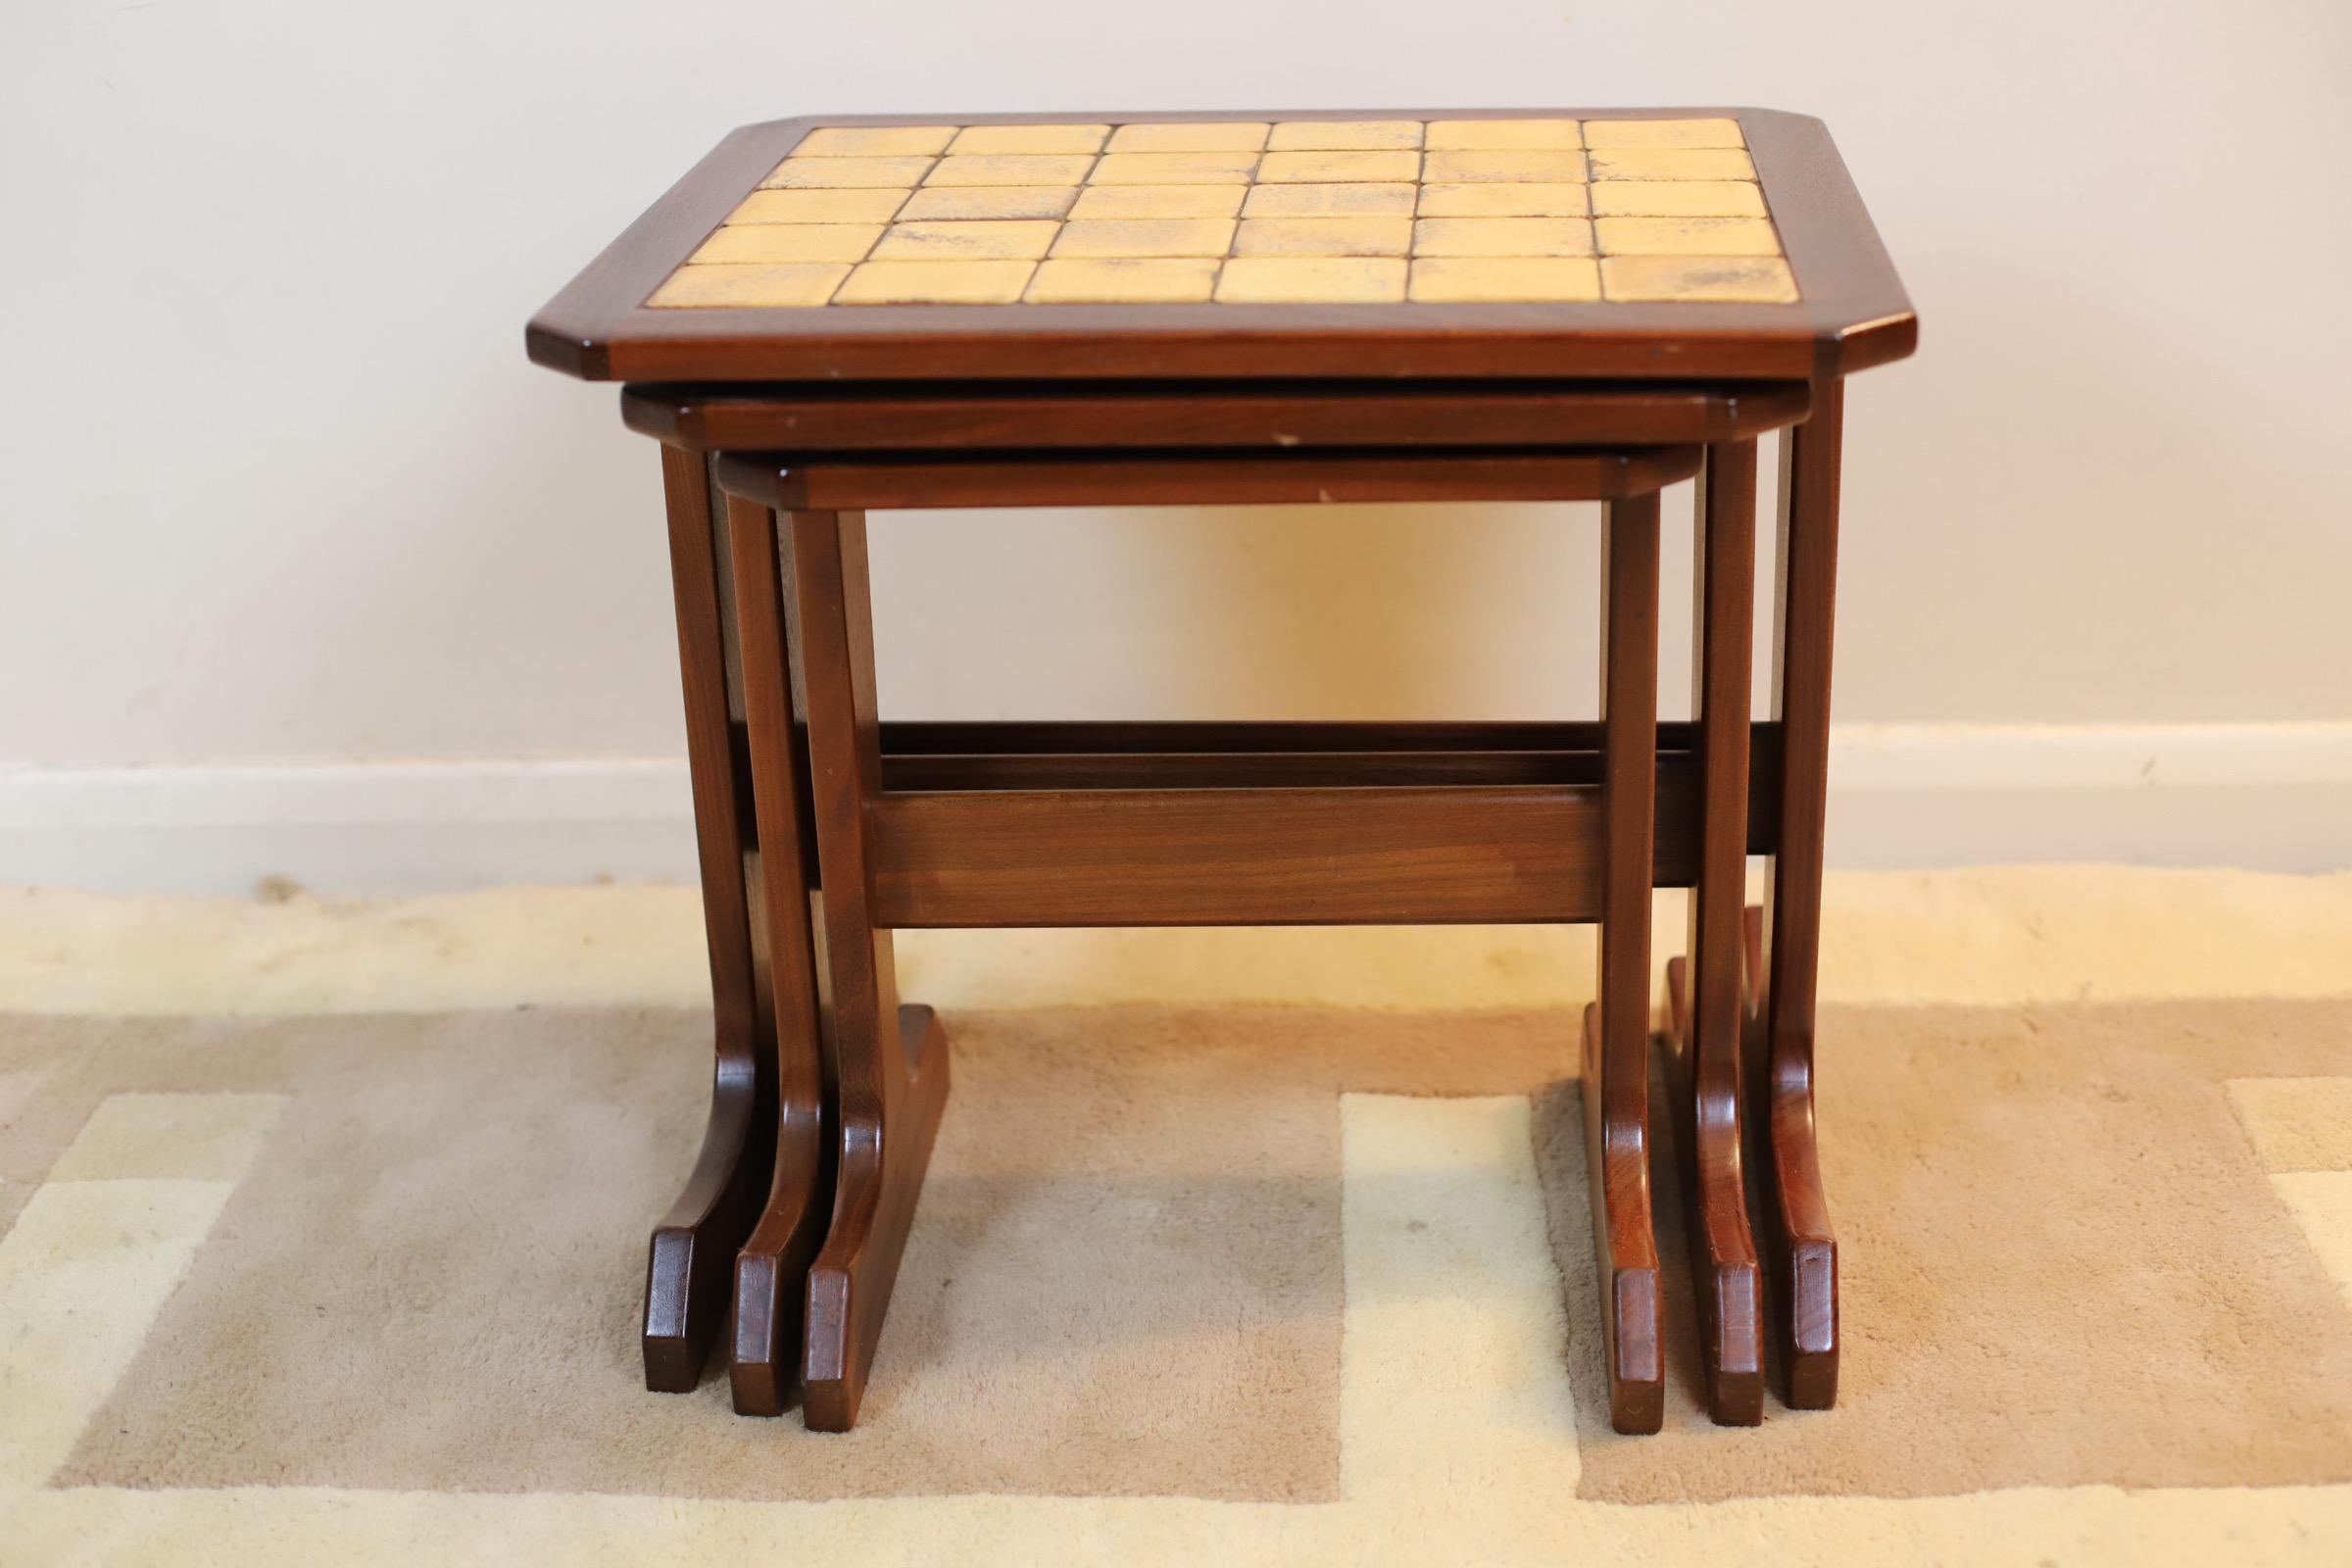 A Vintage tiled nest of 3 tables in teak, this nest of tables is one of the most efficient ways to save space in the home. Tucked away in a corner, they provide a quick and easy way to achieve more surface space in a room. This can be particularly